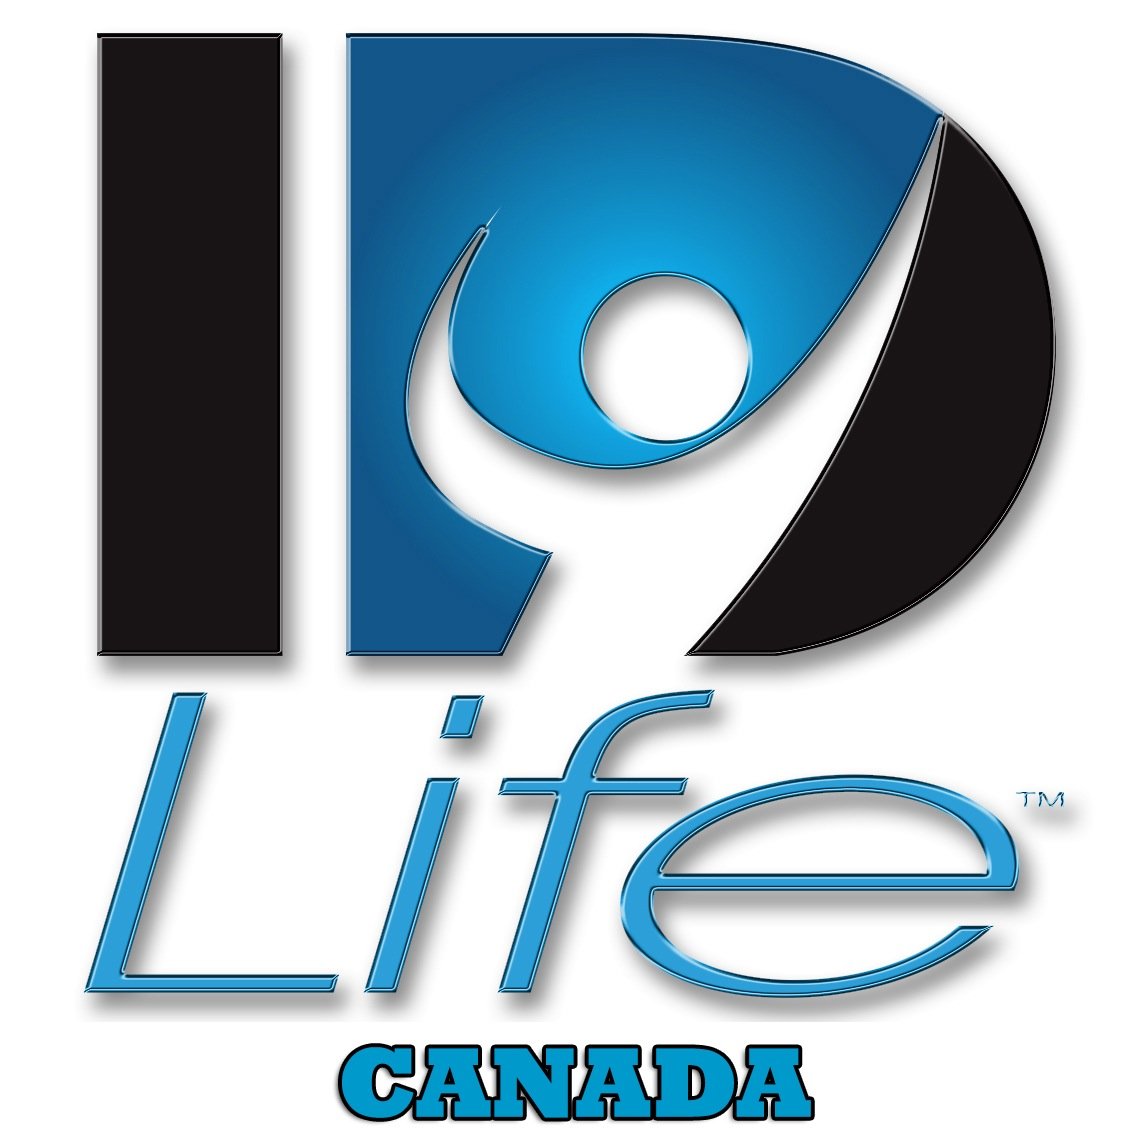 #IDLife is a new U.S.-based company specializing in individualized nutrition. We need reps in #Canada! Coming in 2016! Contact me Jim@IDLifeFitness.com